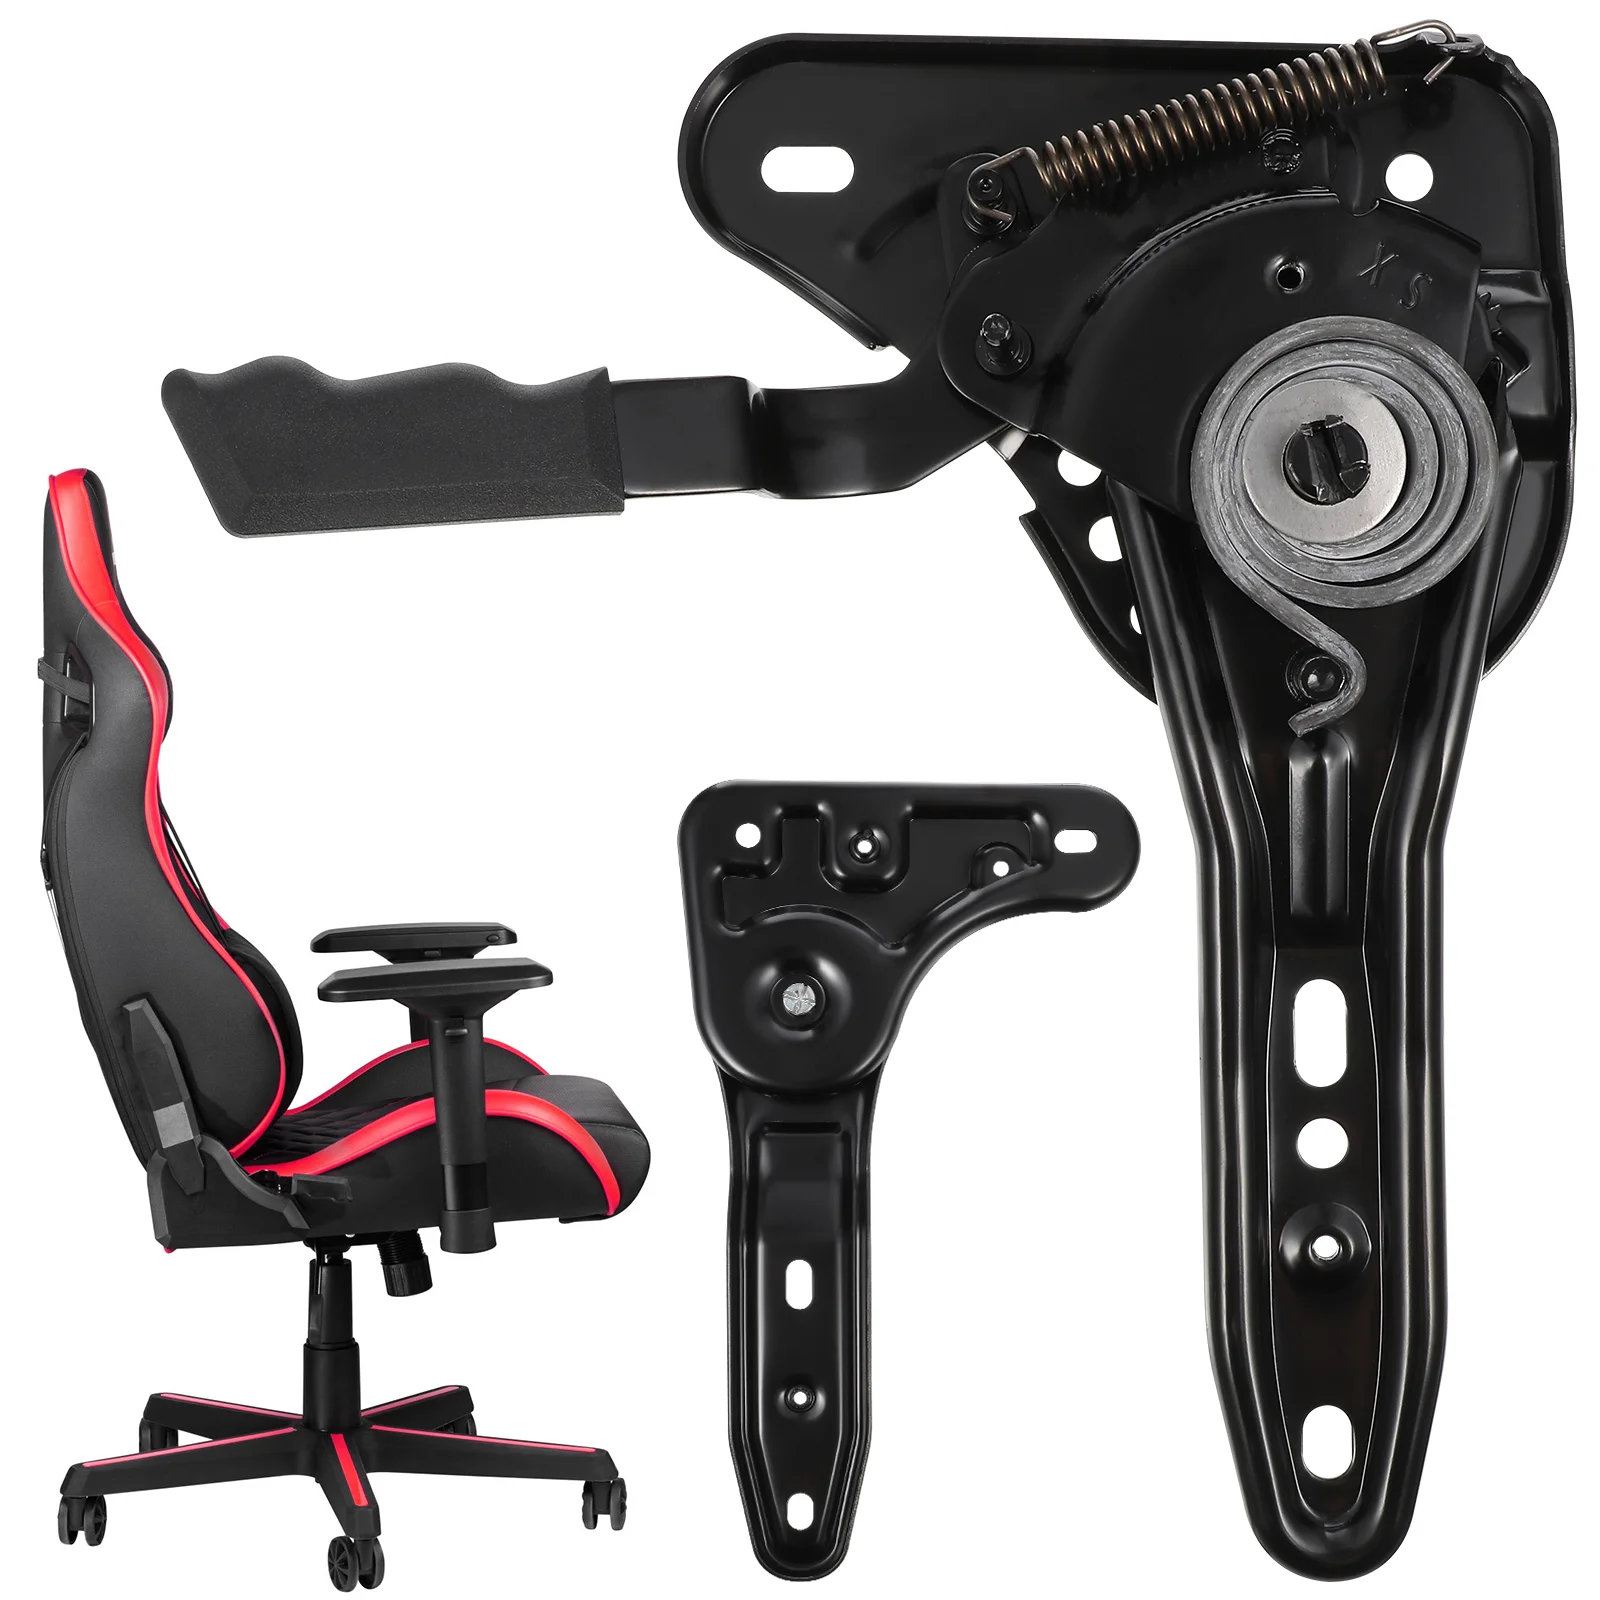 Angle Adjuster Chair Angle Adjuster Gaming Chair Tuner Angle Adjuster Tool Chair Accessory Backrest Tilt adjustment mechanism motorcycle scooter valves tool scooter engine valves screw adjustment high hardness wrench spanner tool motorbike accessory